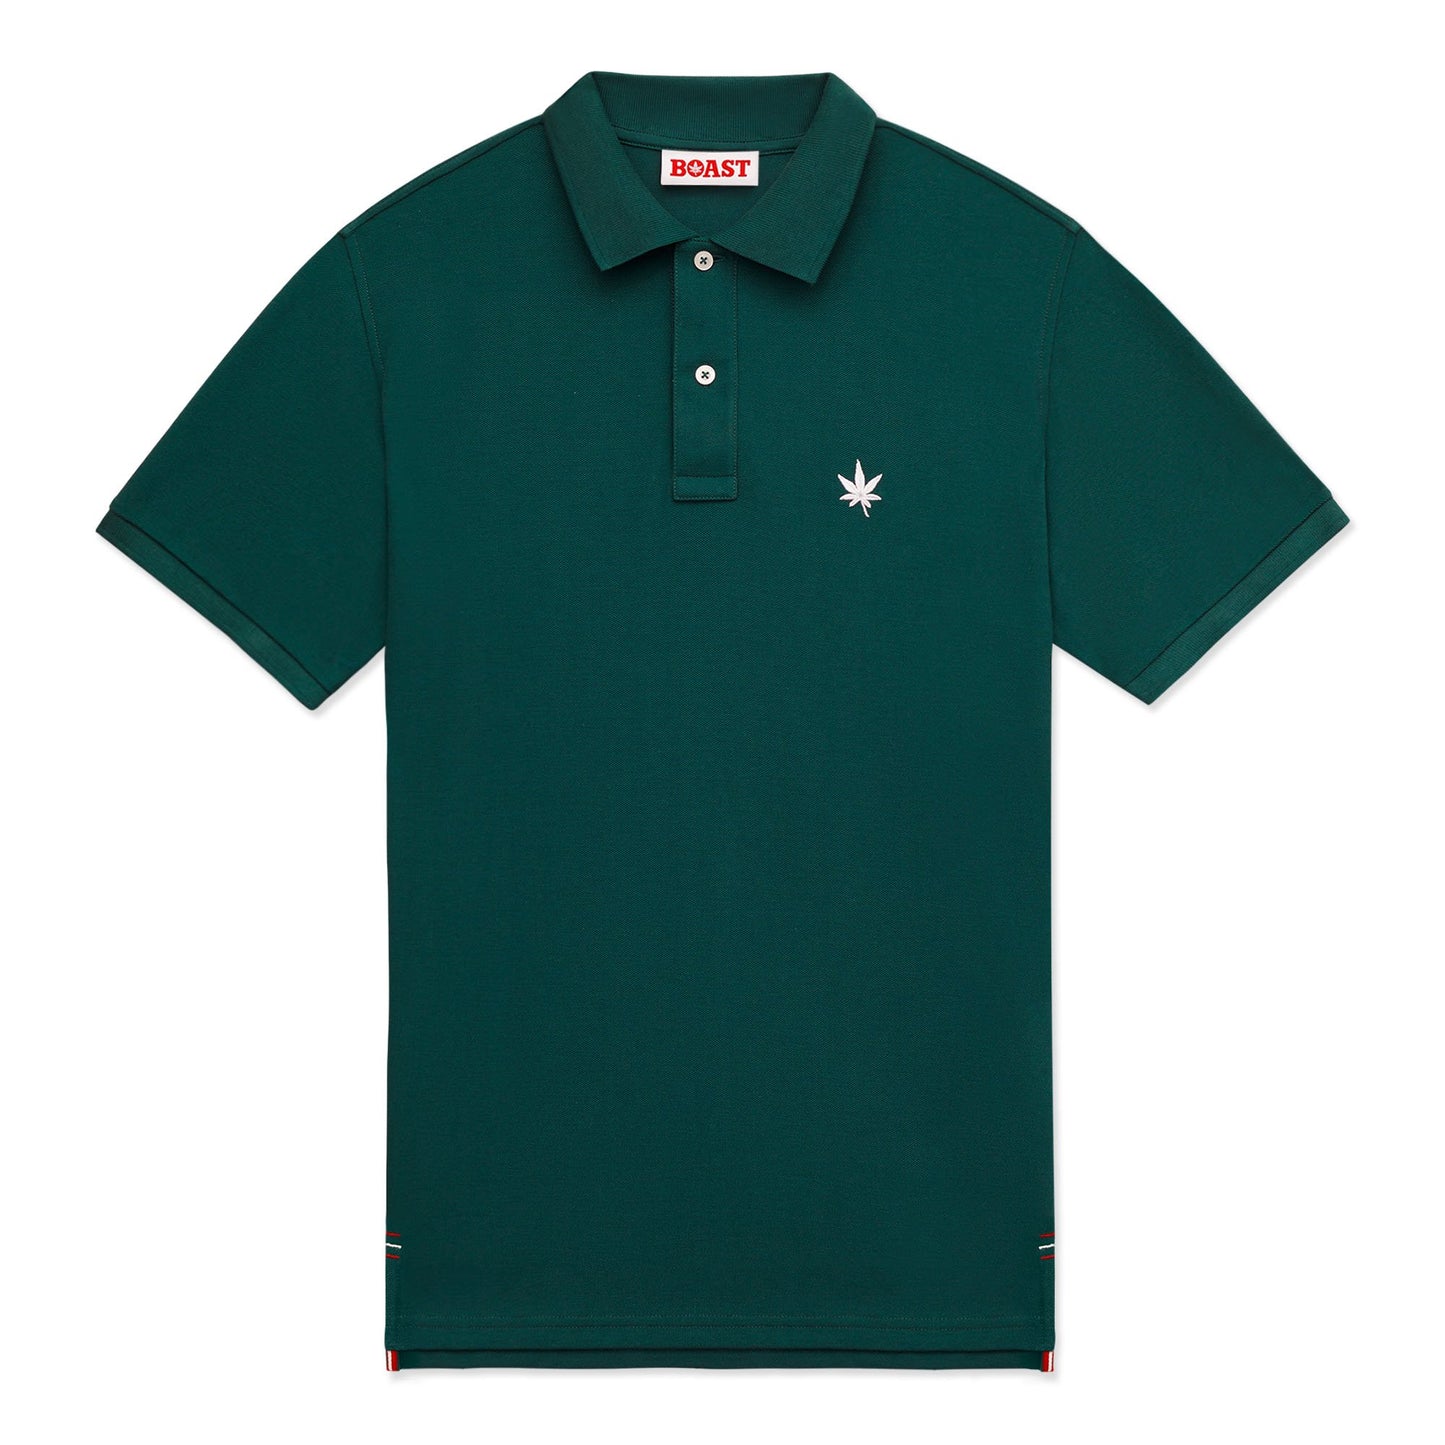 Ivy green polo with white embroidered leaf on the left chest.